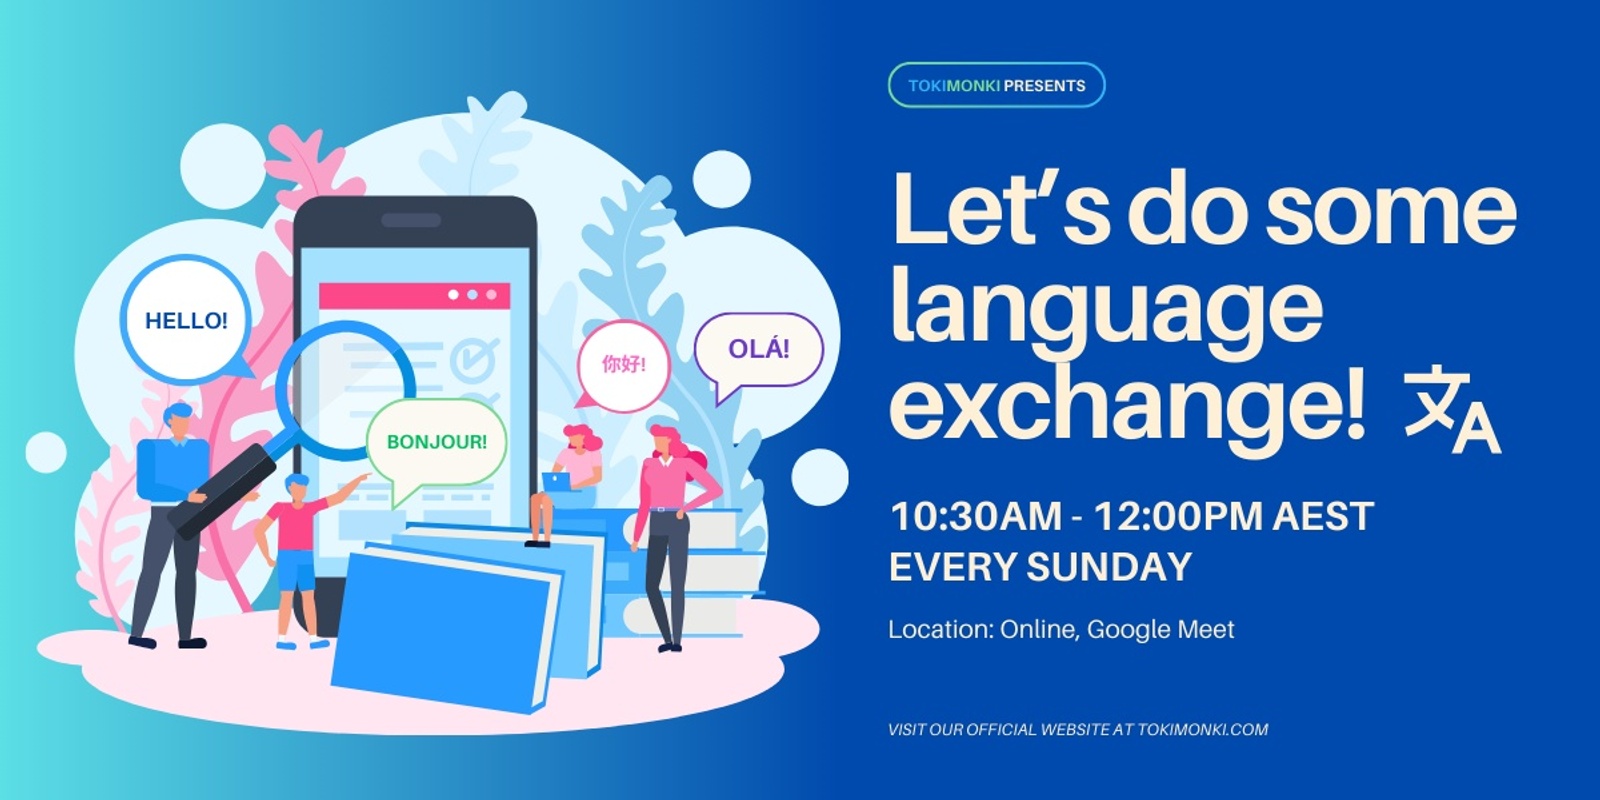 Banner image for Learn language through language exchange! (All languages)